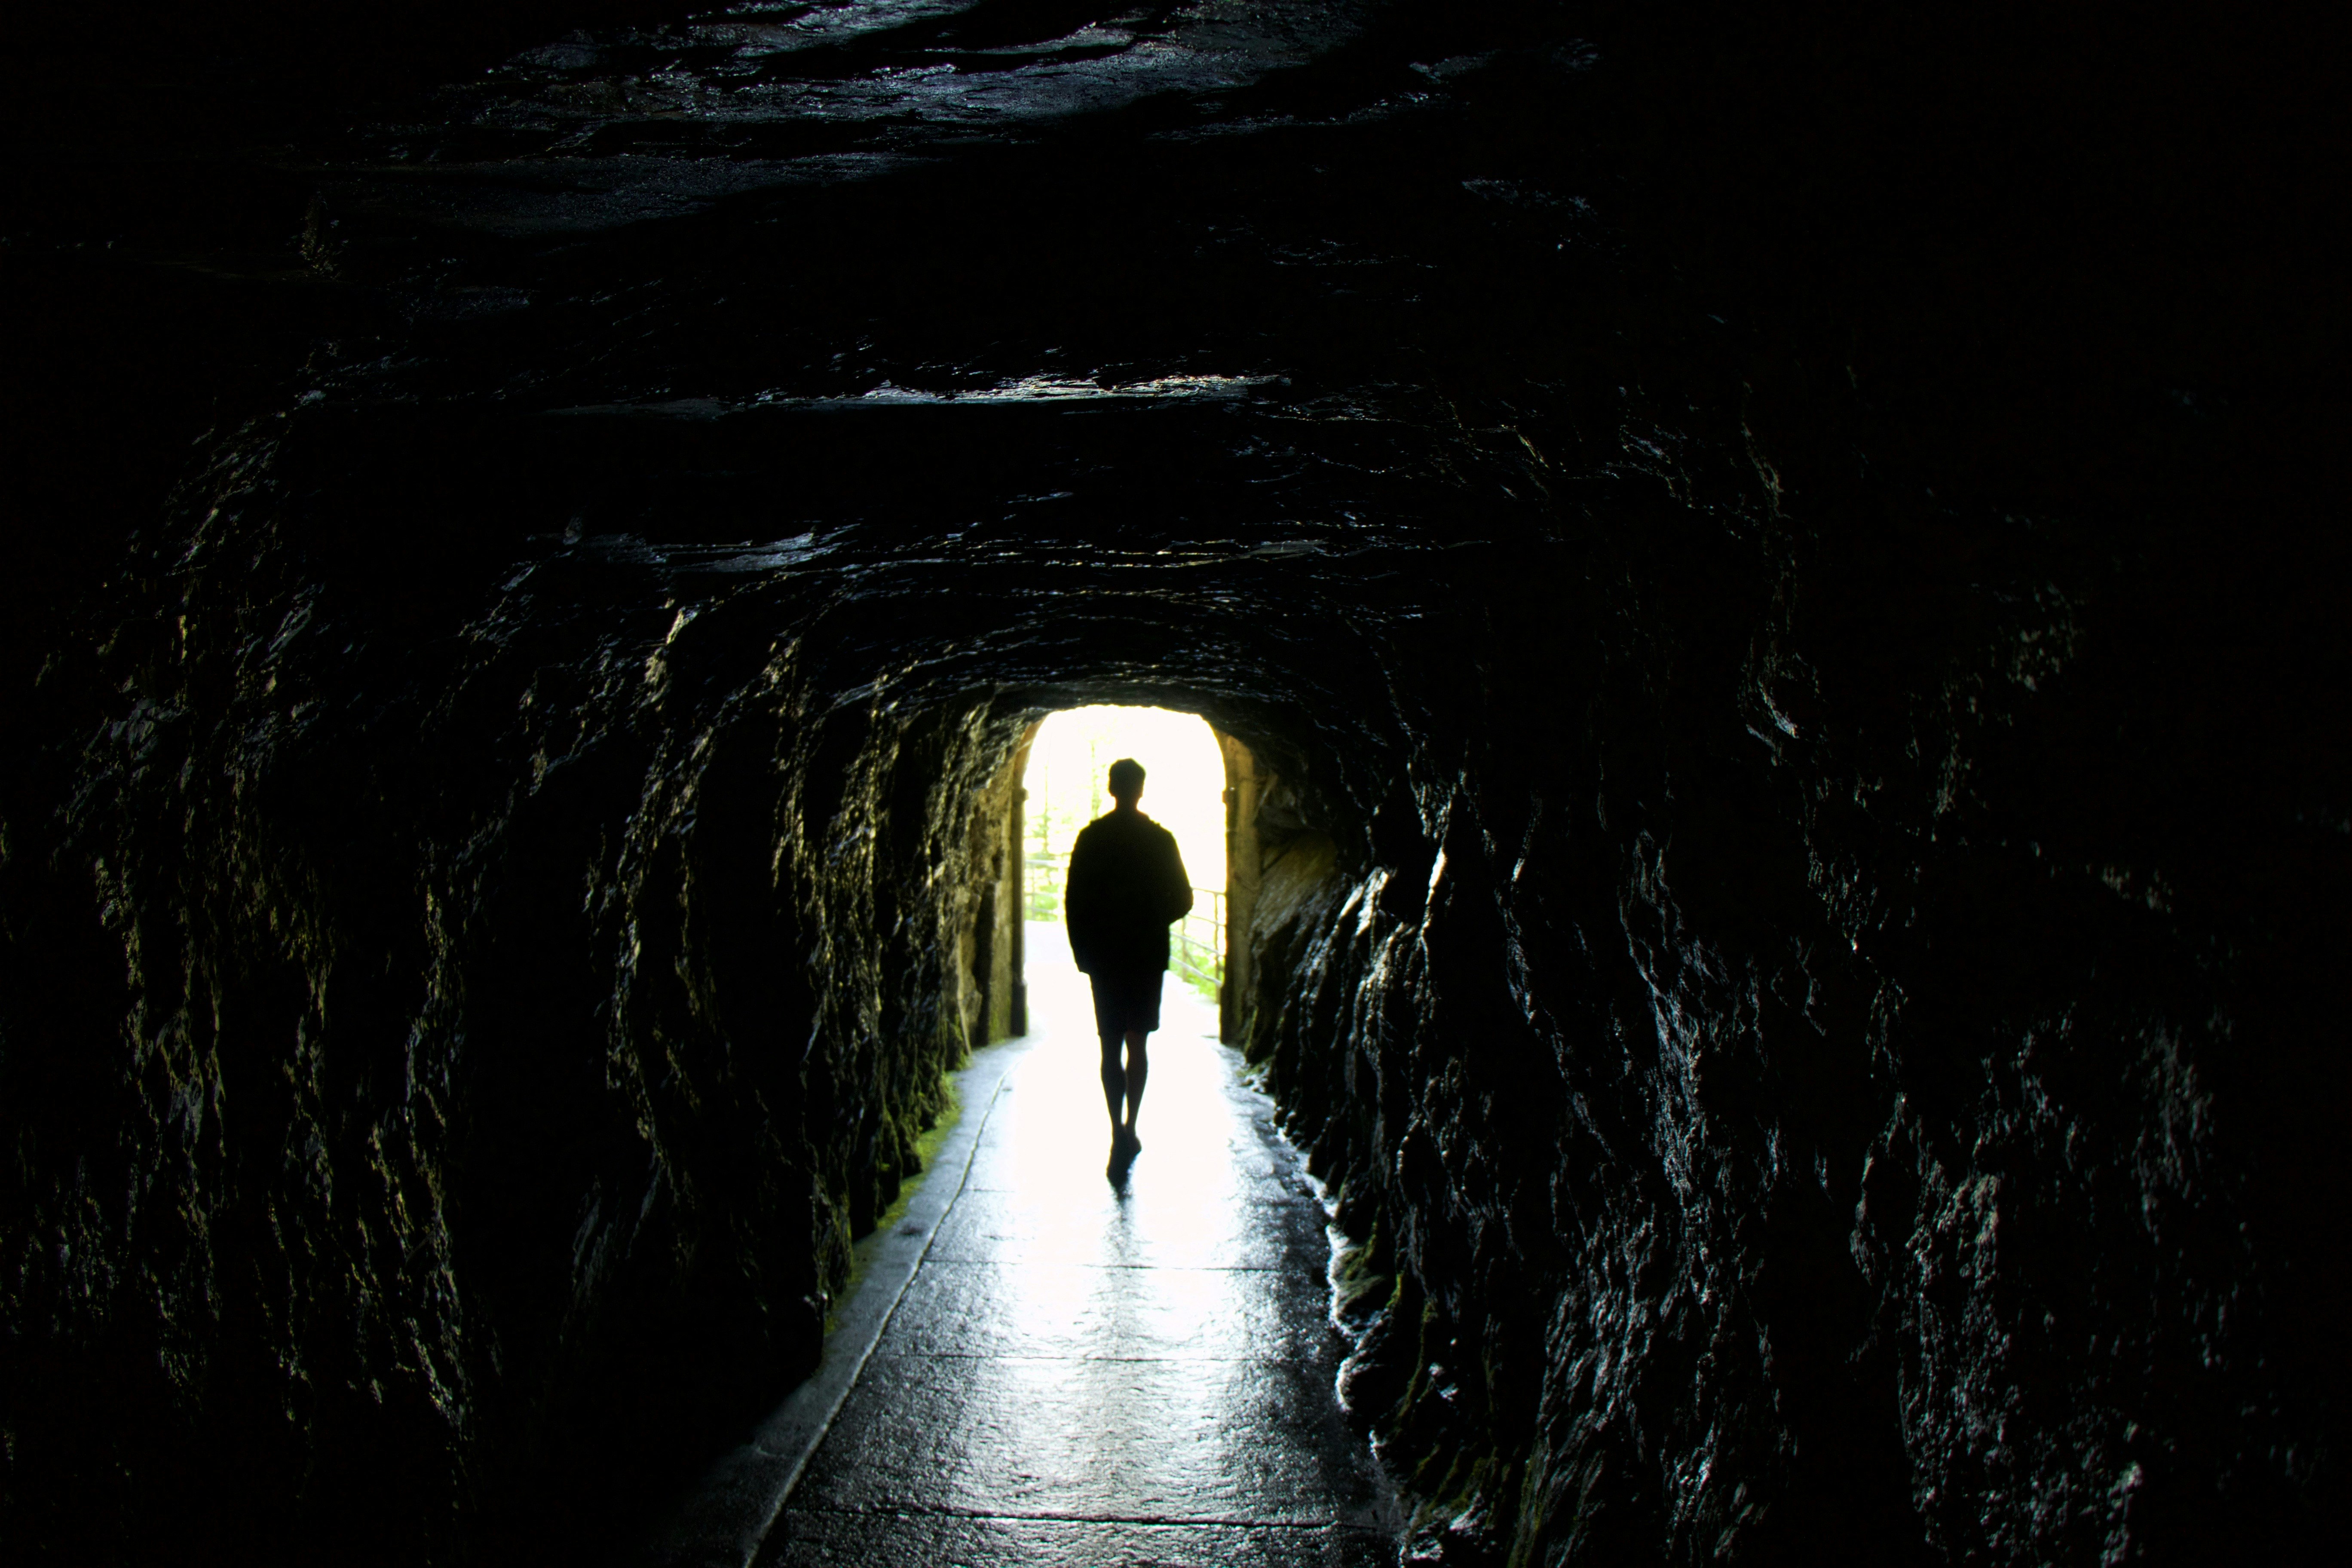 person walking on tunnel during daytime